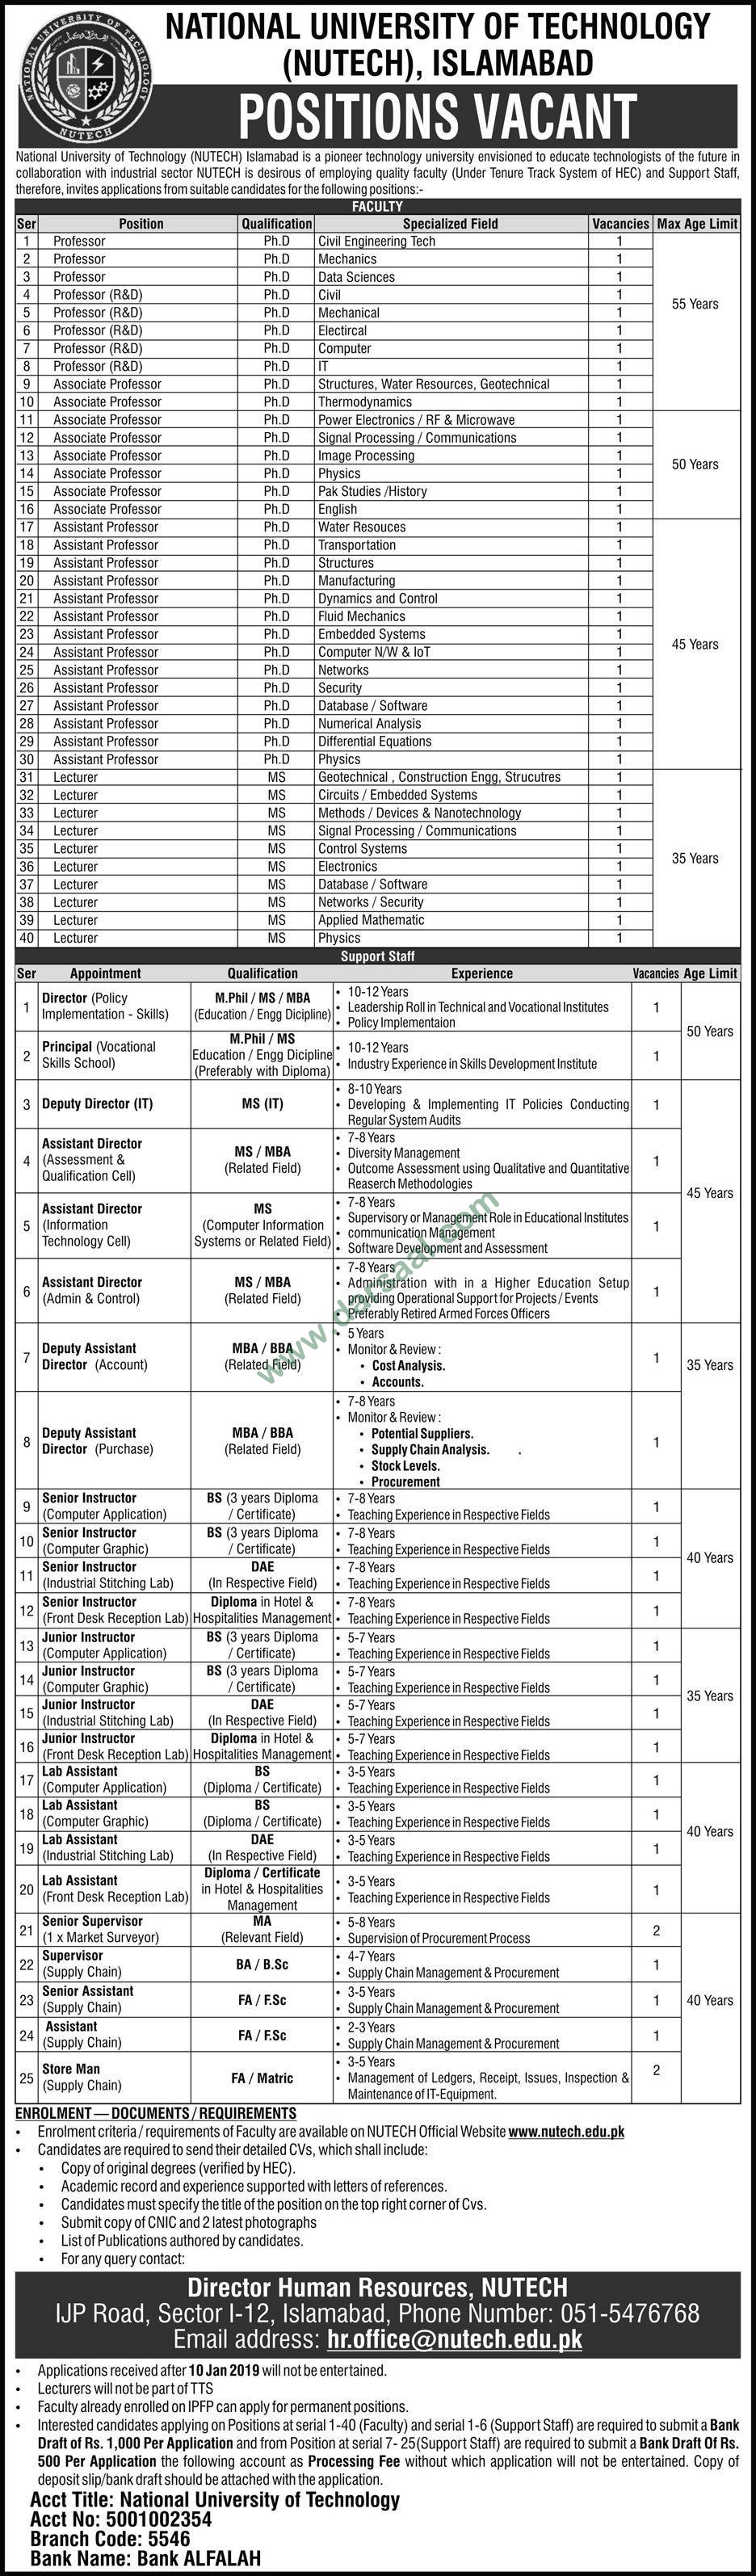 IT Director Jobs in National University of Technology in Islamabad - Dec 24, 2018